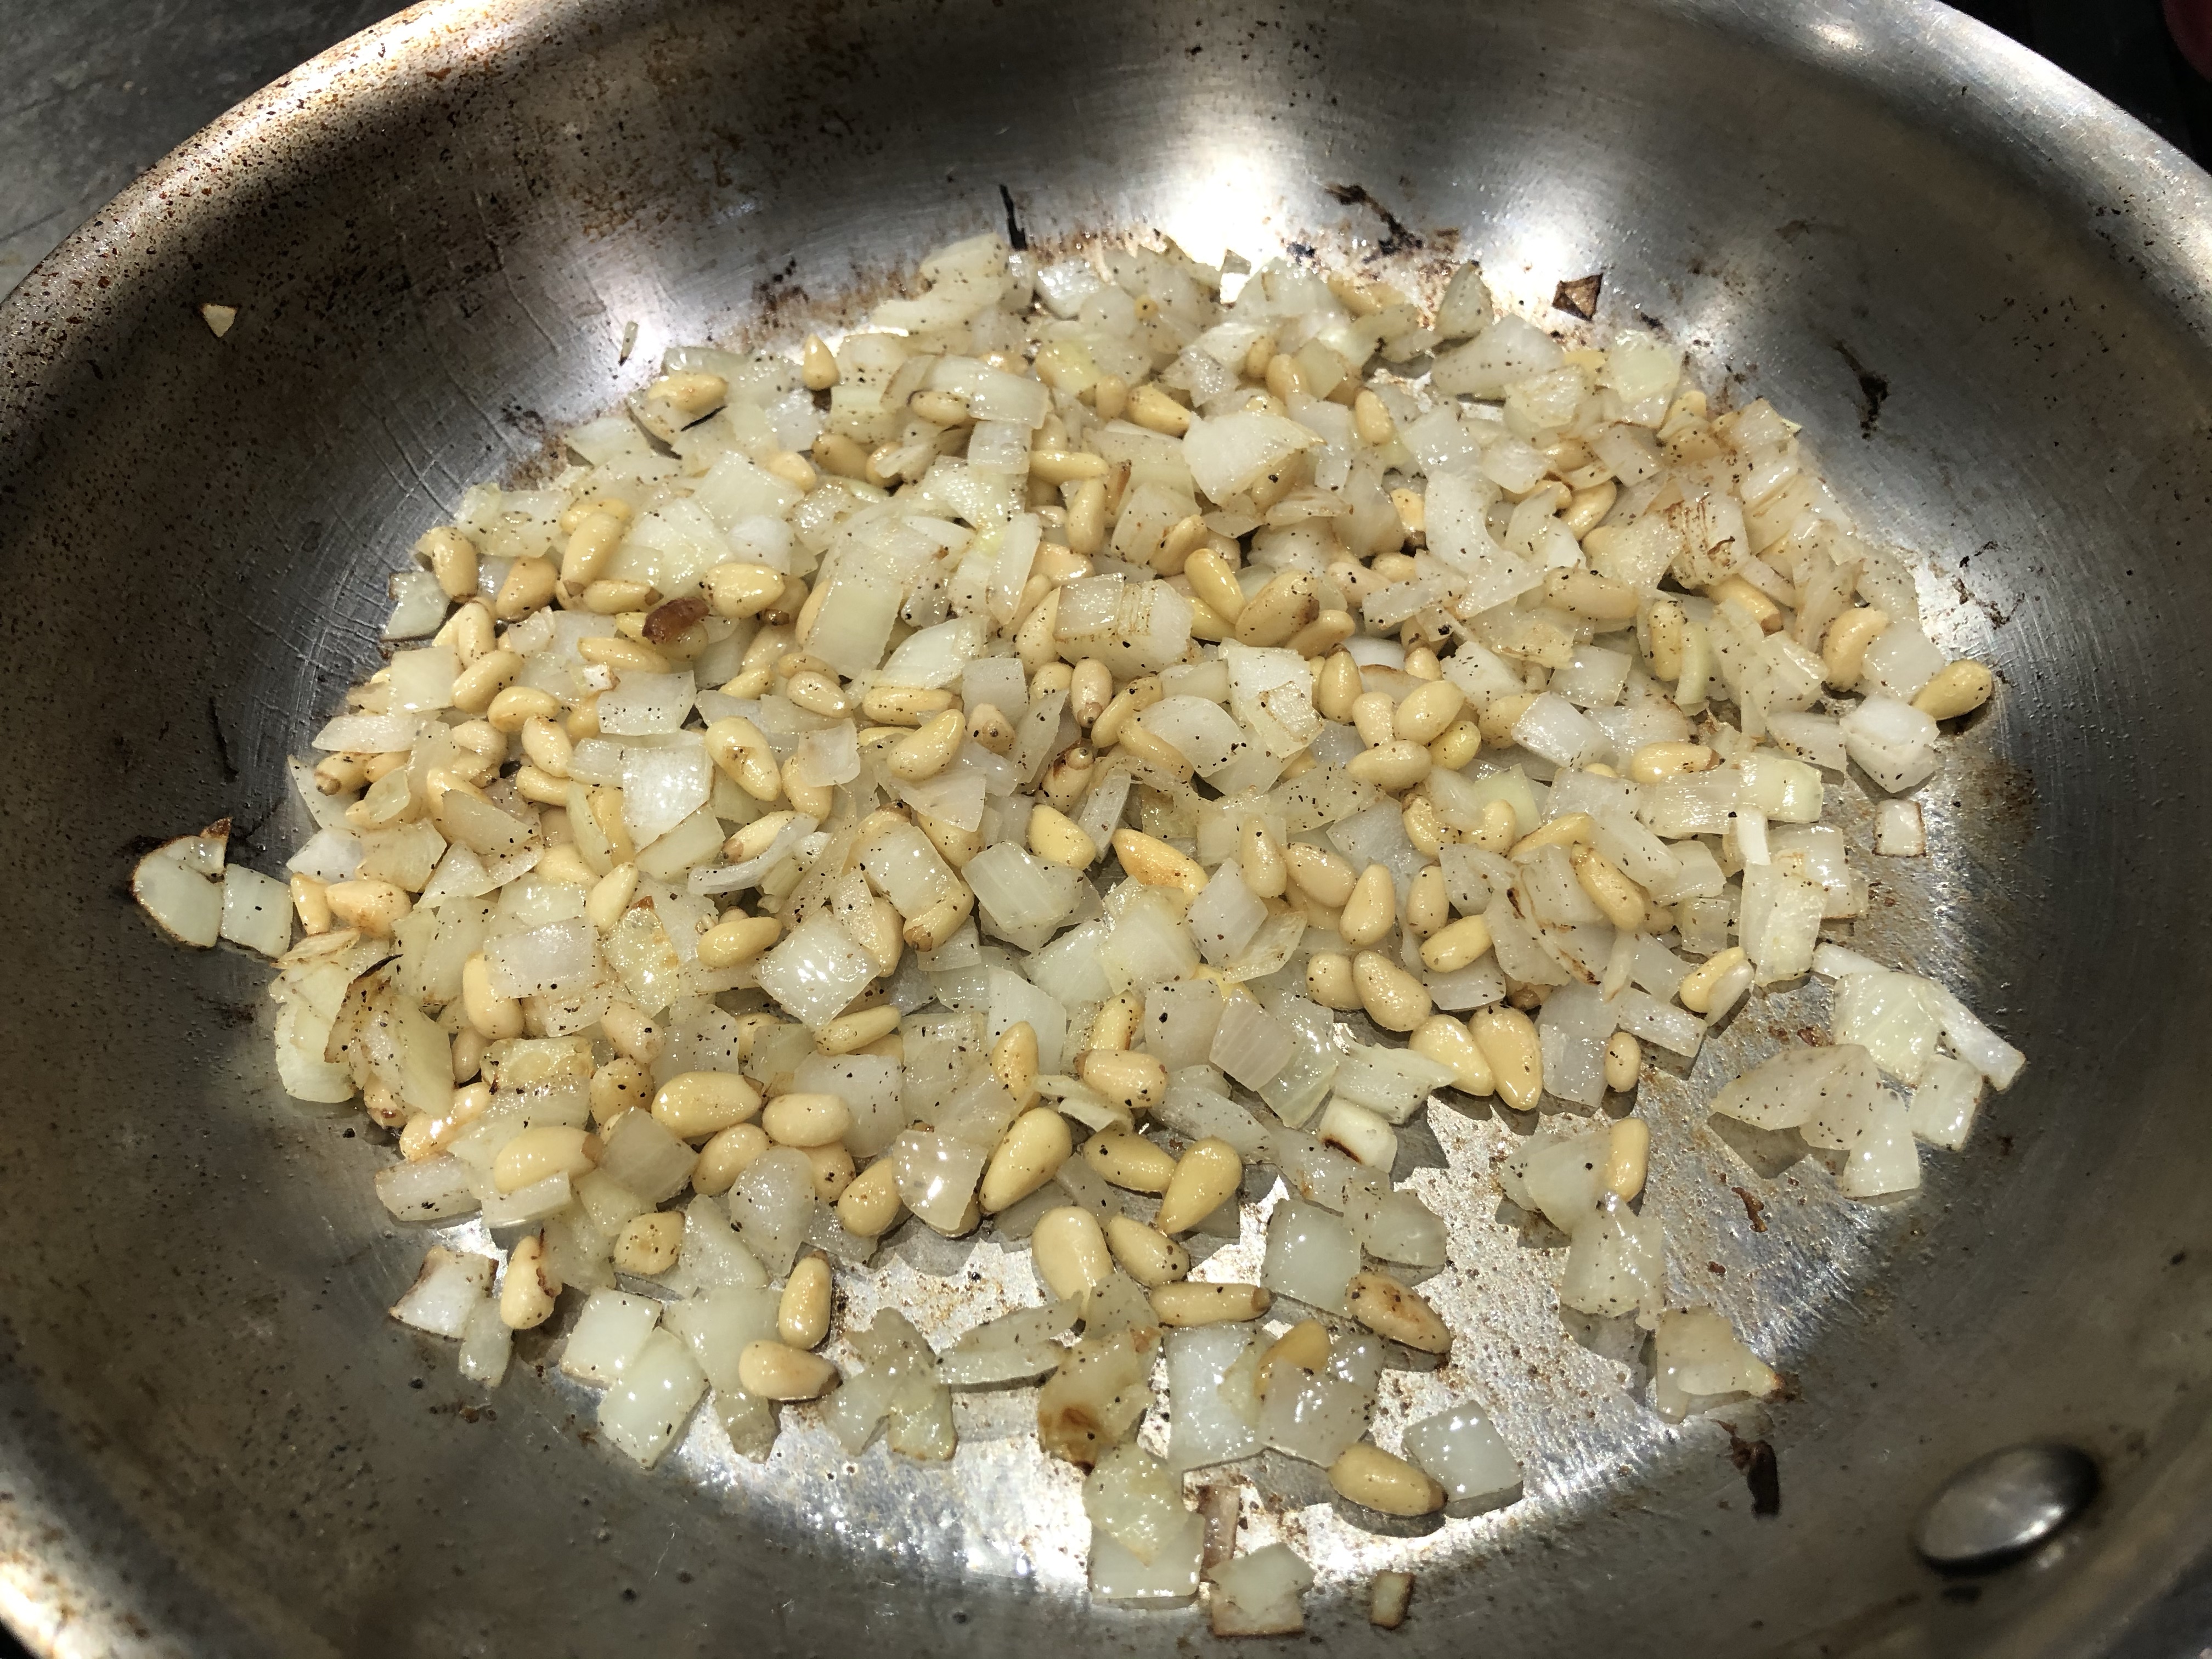 Cleared onions and toasted pine nuts ready for garlic and candy cap mushrooms.